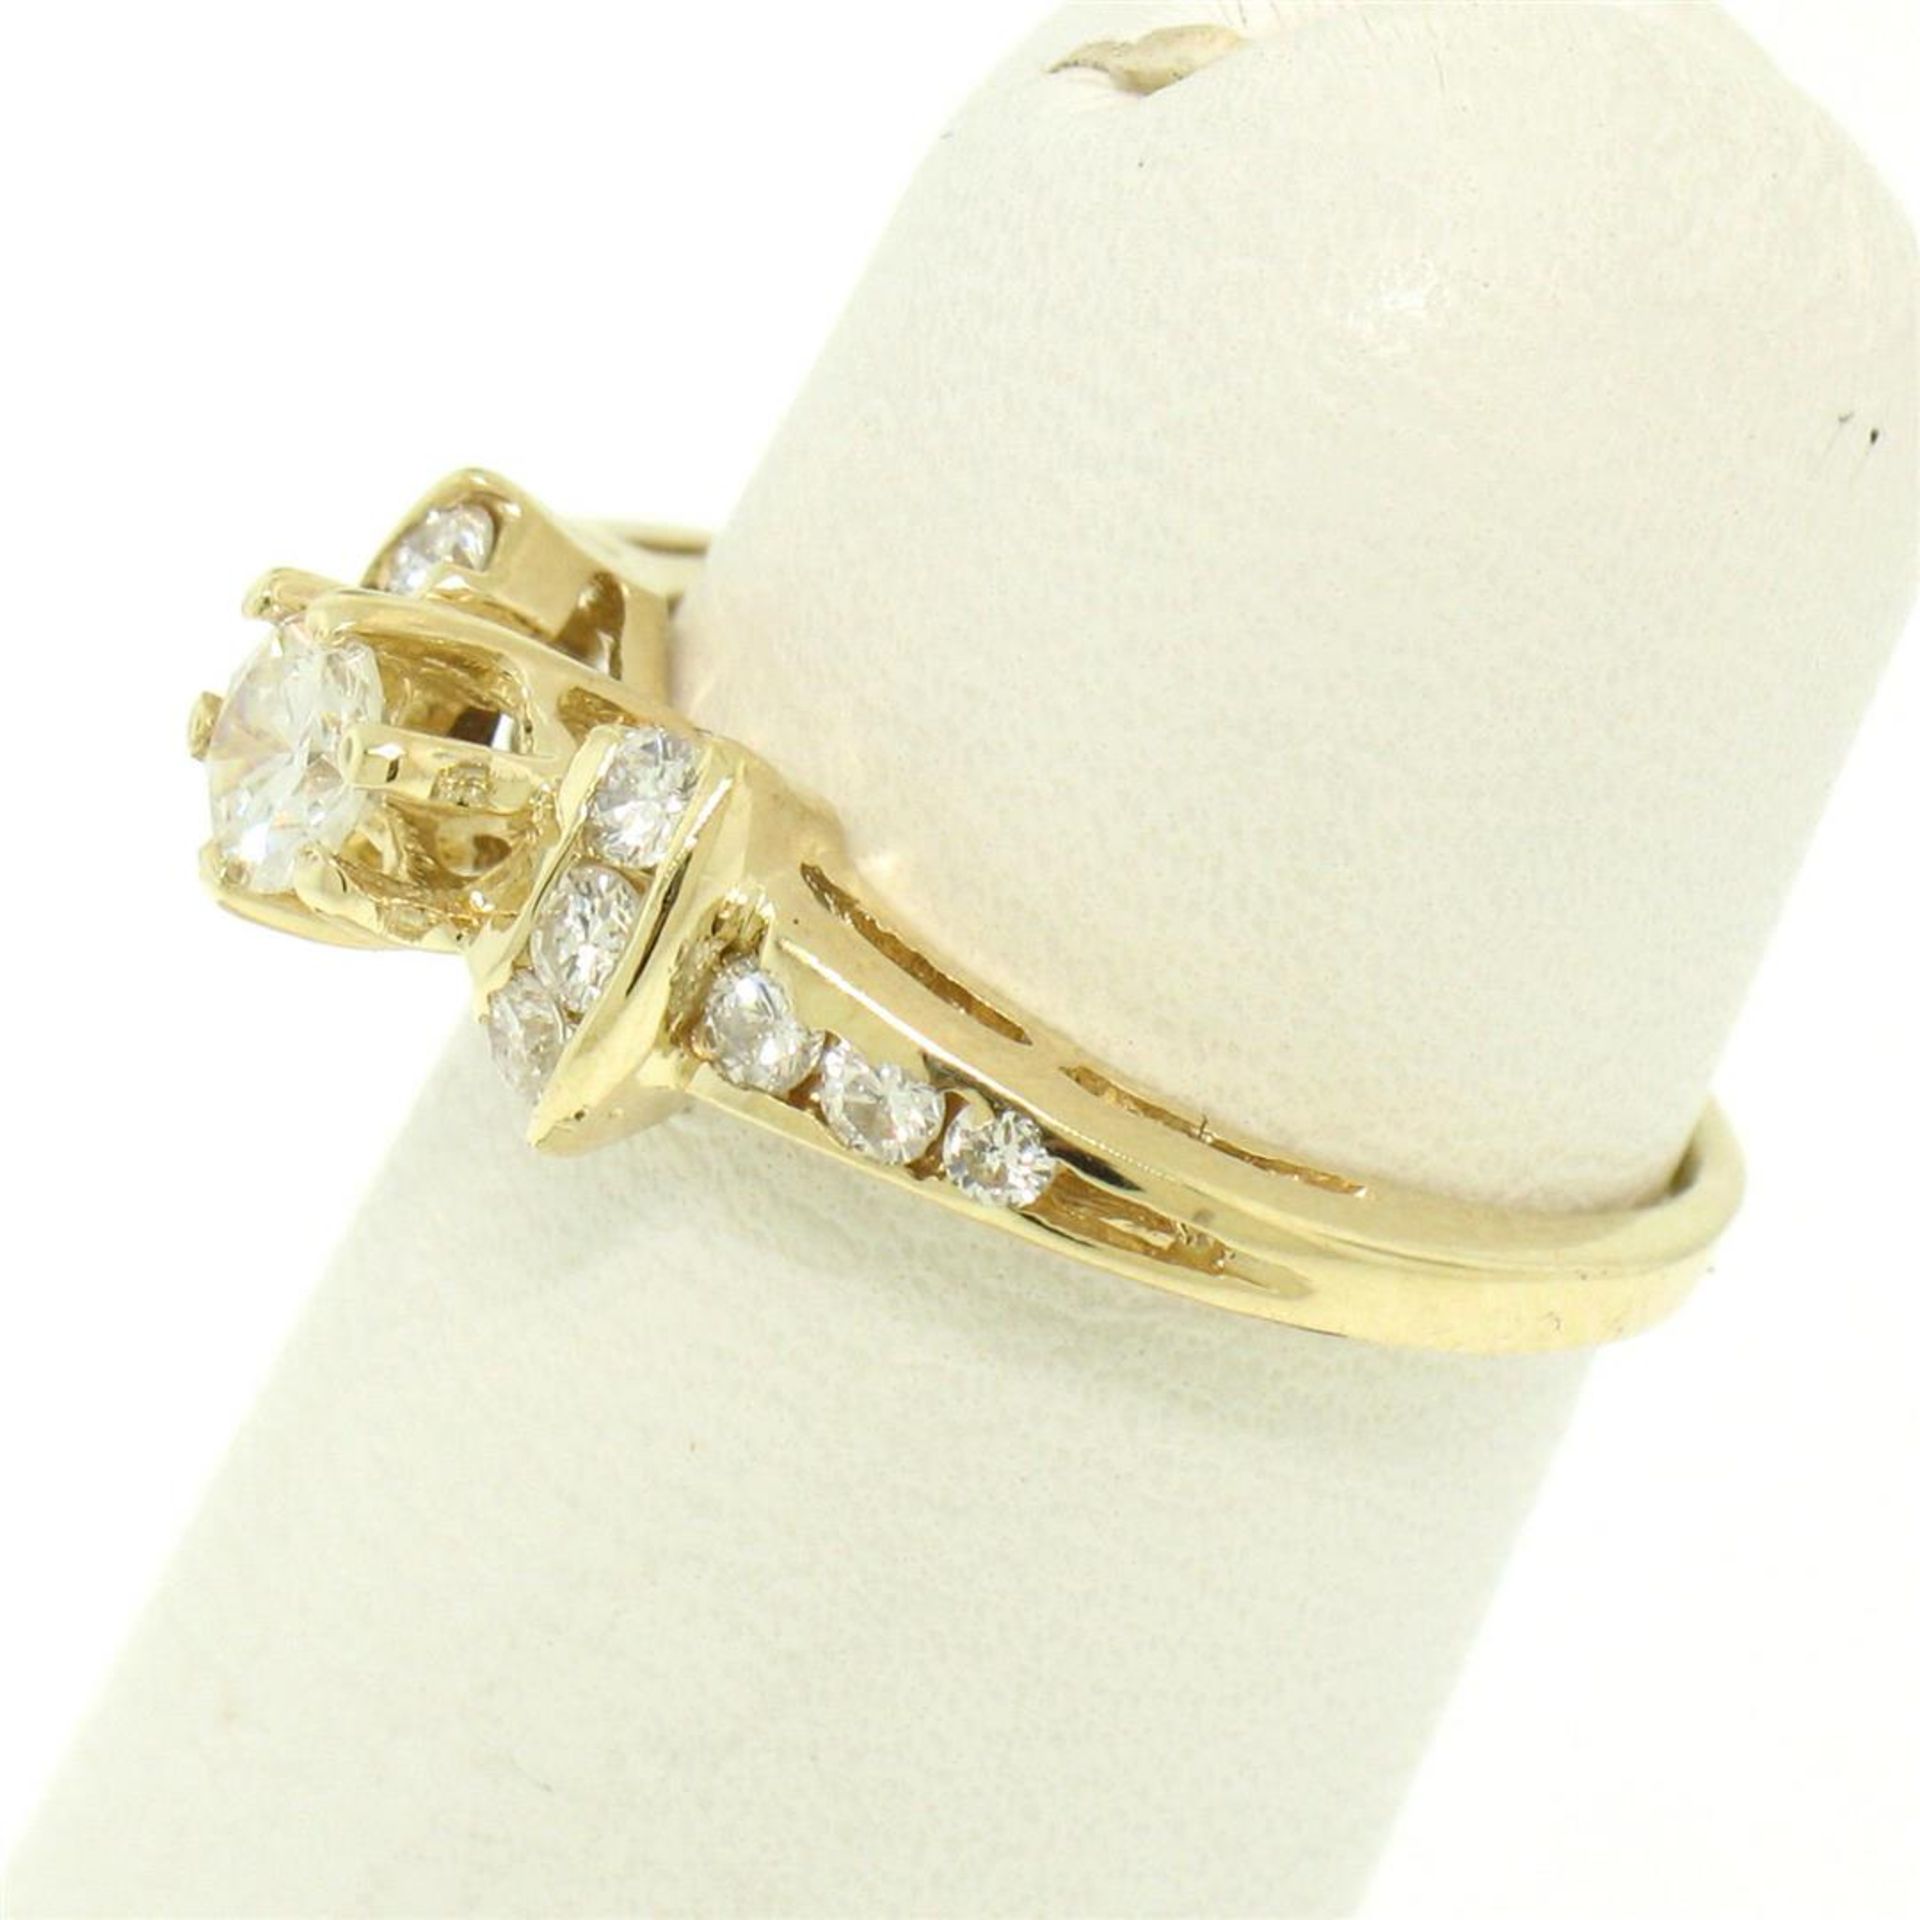 14k Yellow Gold Petite 0.42 ctw Round Diamond Engagement Ring w/ Channel Accents - Image 5 of 8